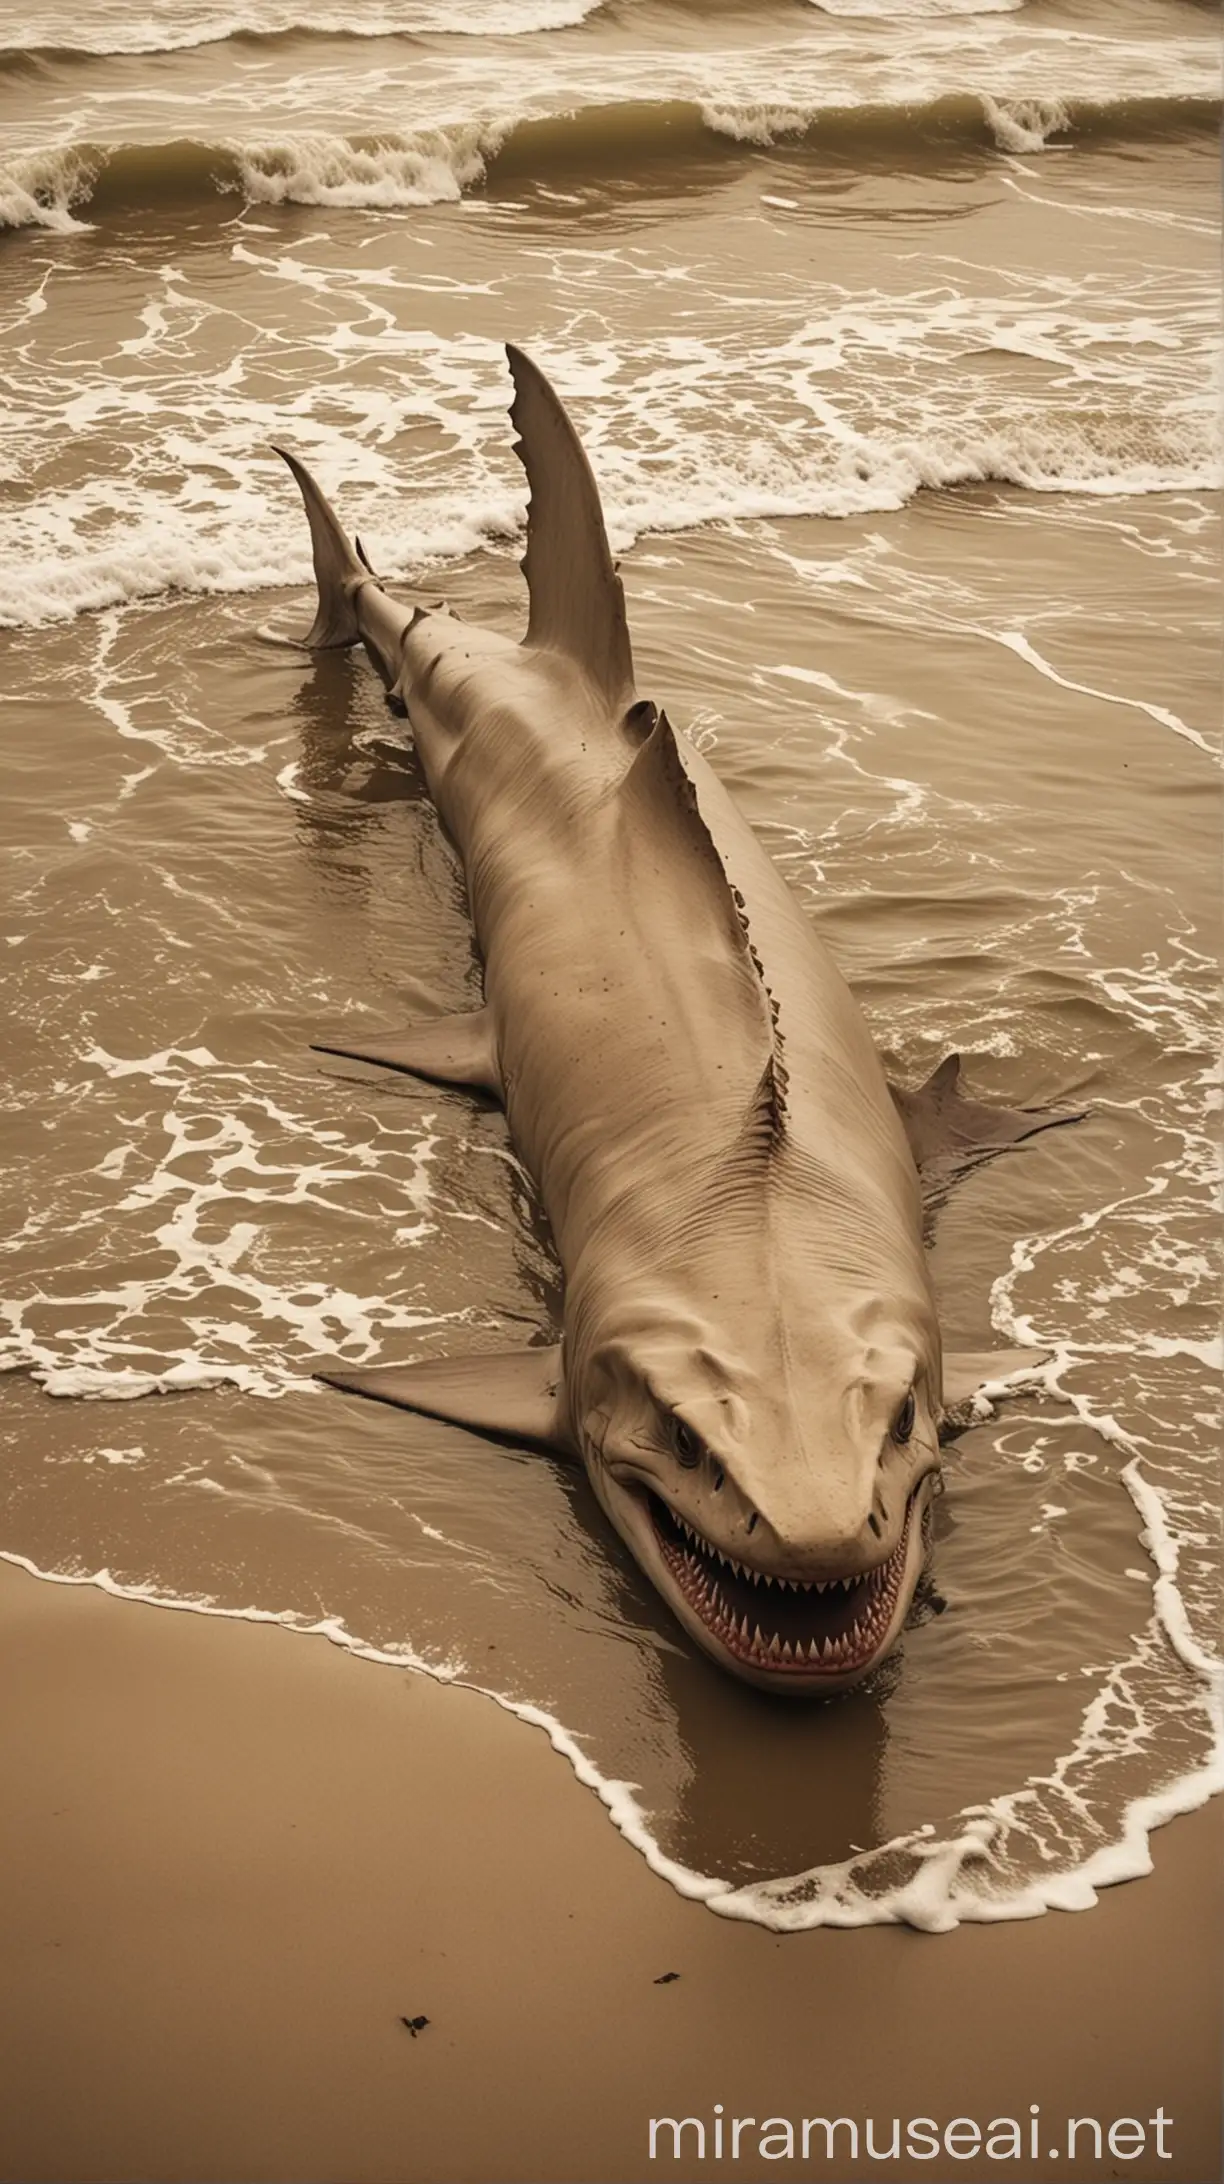 Create an image of a giant goblin shark wash up on the beach make it like a brownish yellow old photo. Make it look real